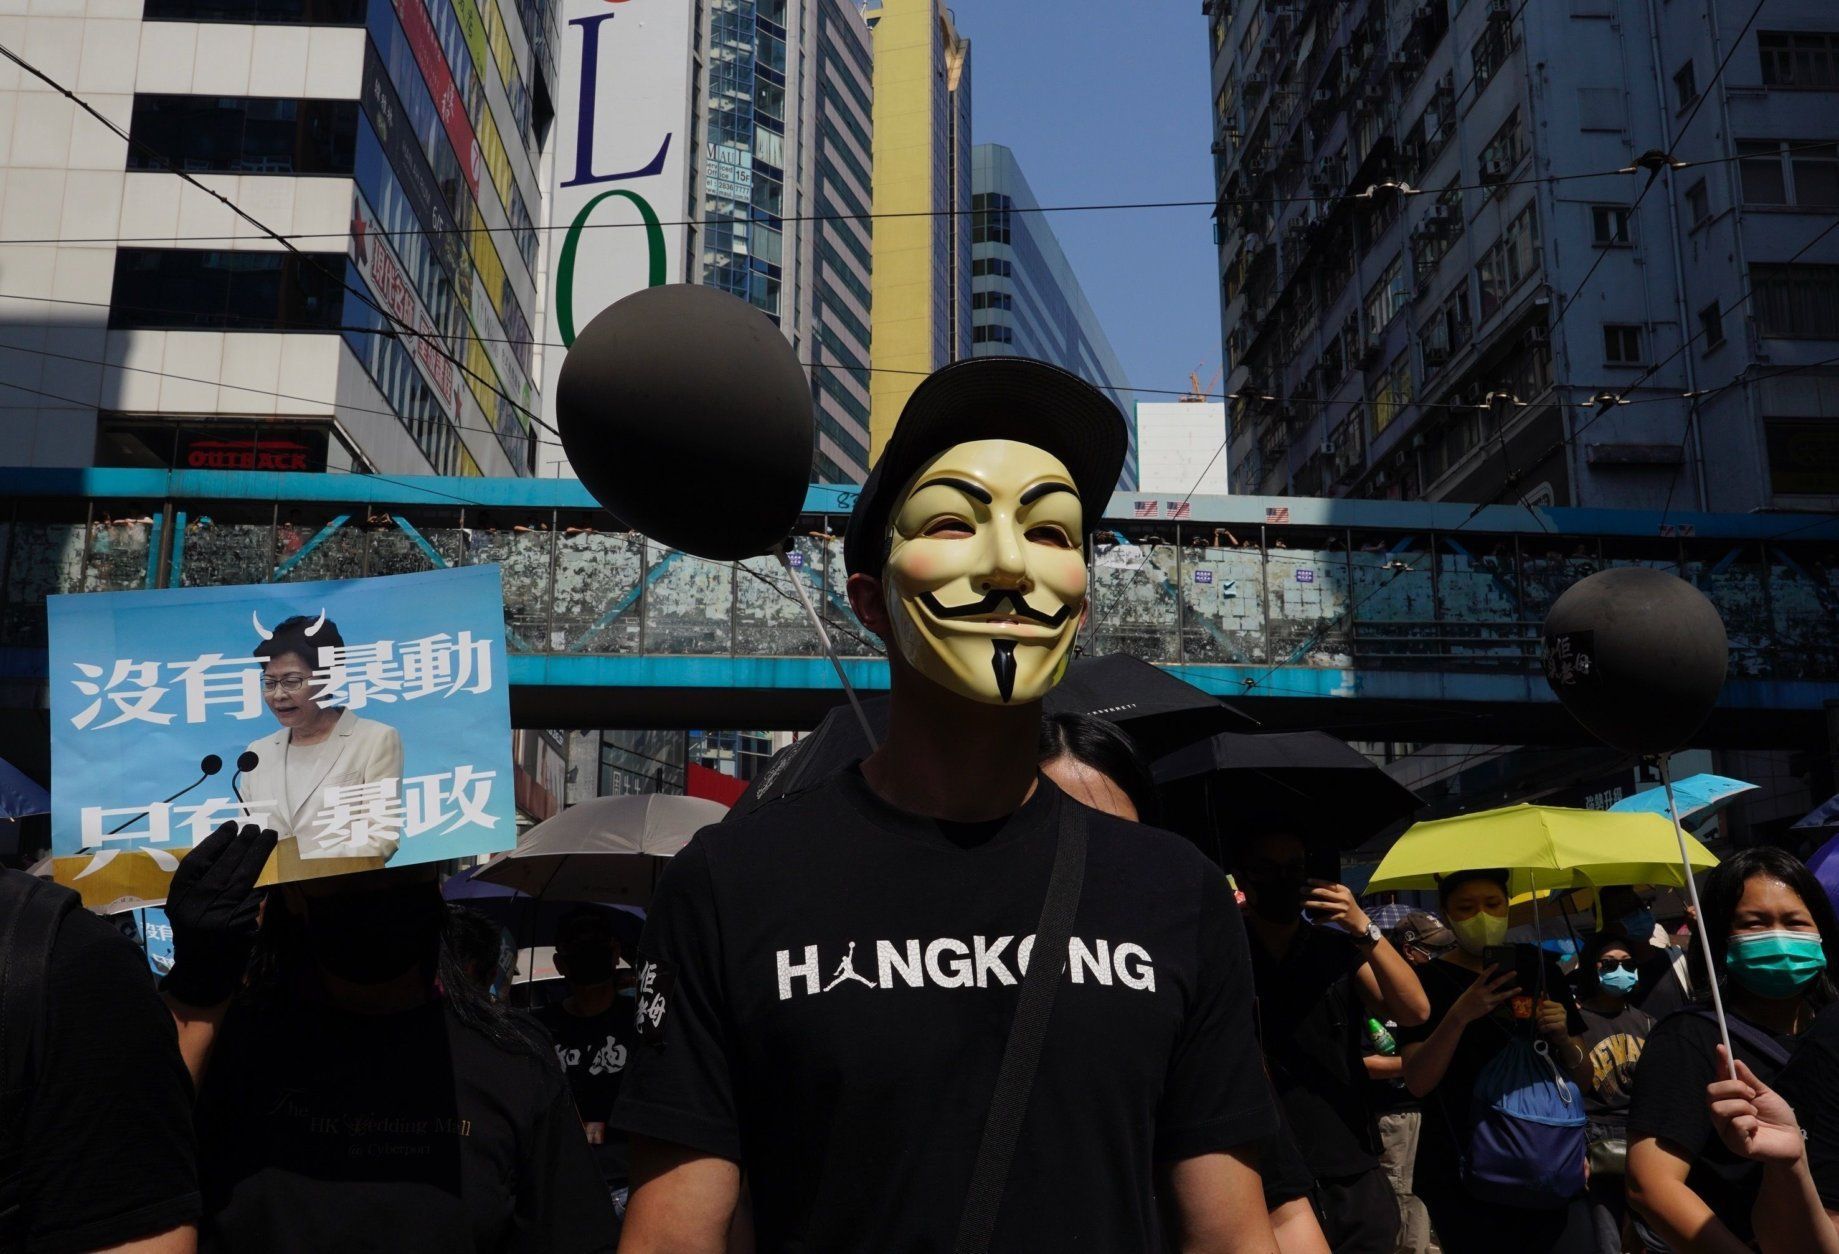 anti-government protesters in hong kong wear masks